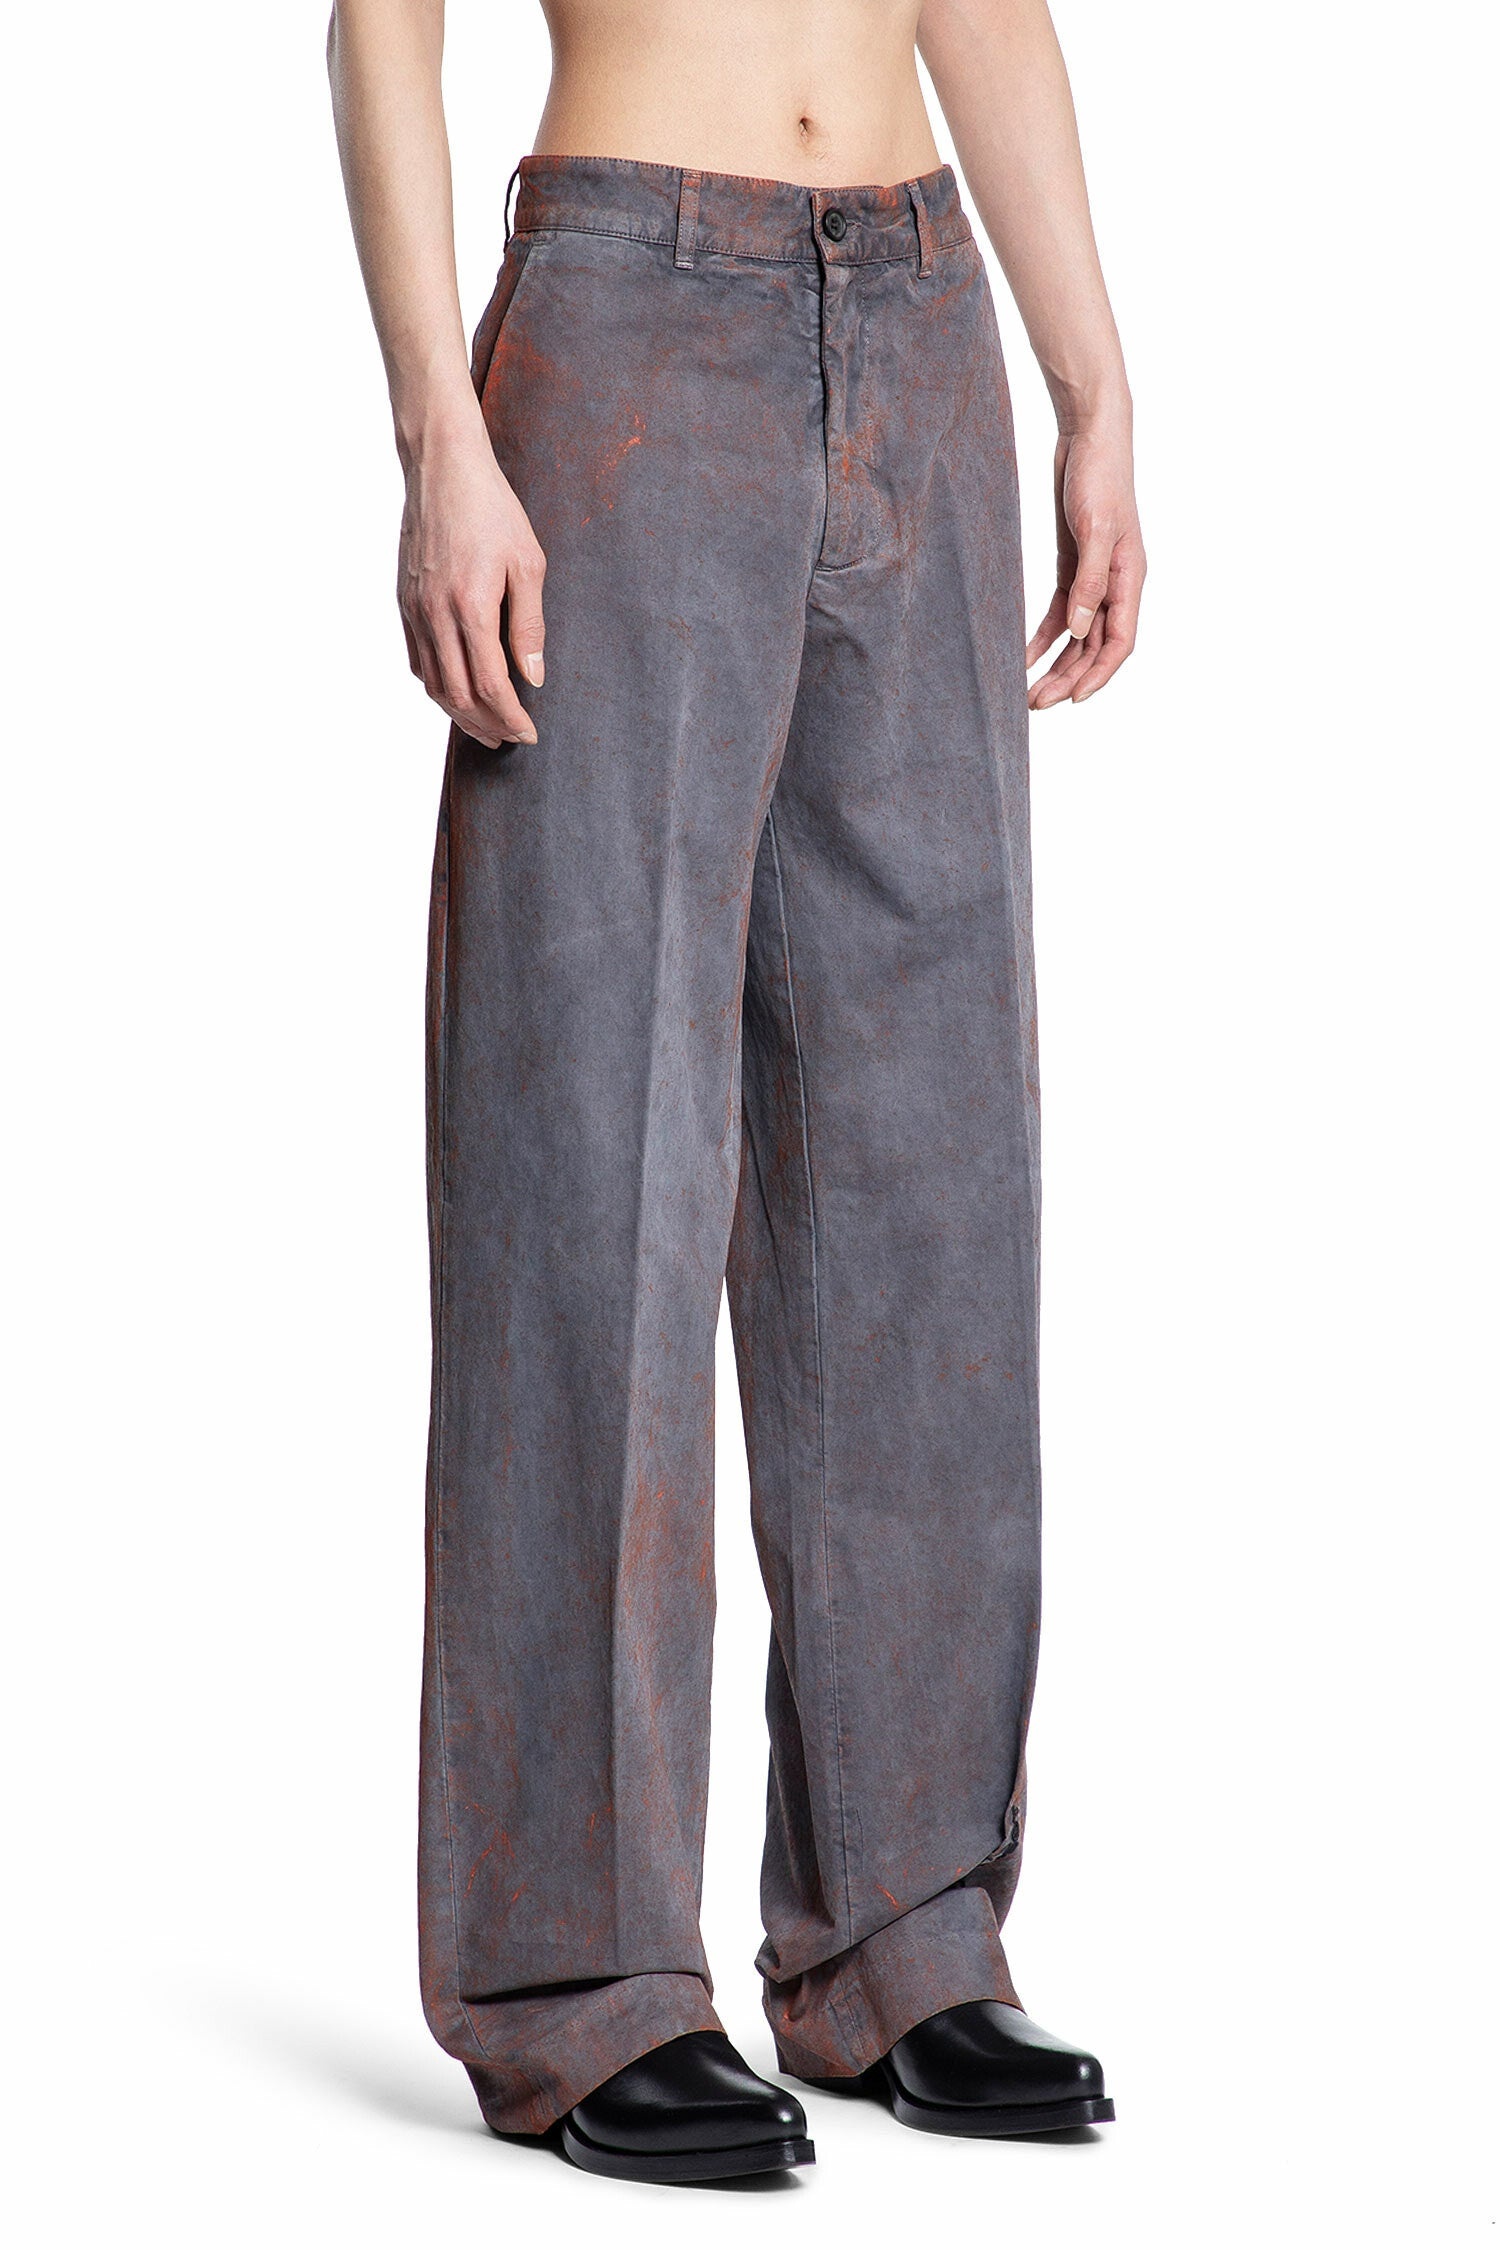 Y/PROJECT MAN GREY TROUSERS - 3